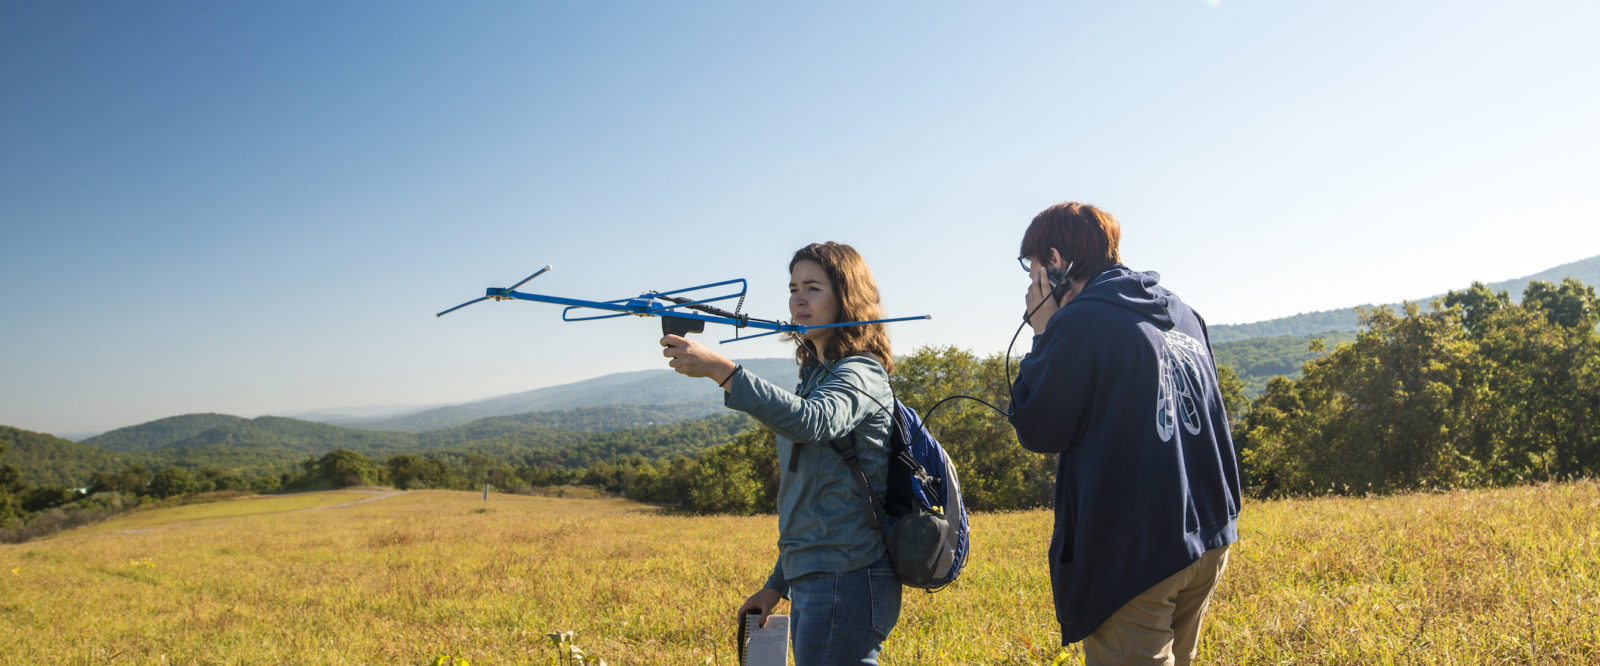 Two students hold telemetry equipment in a field